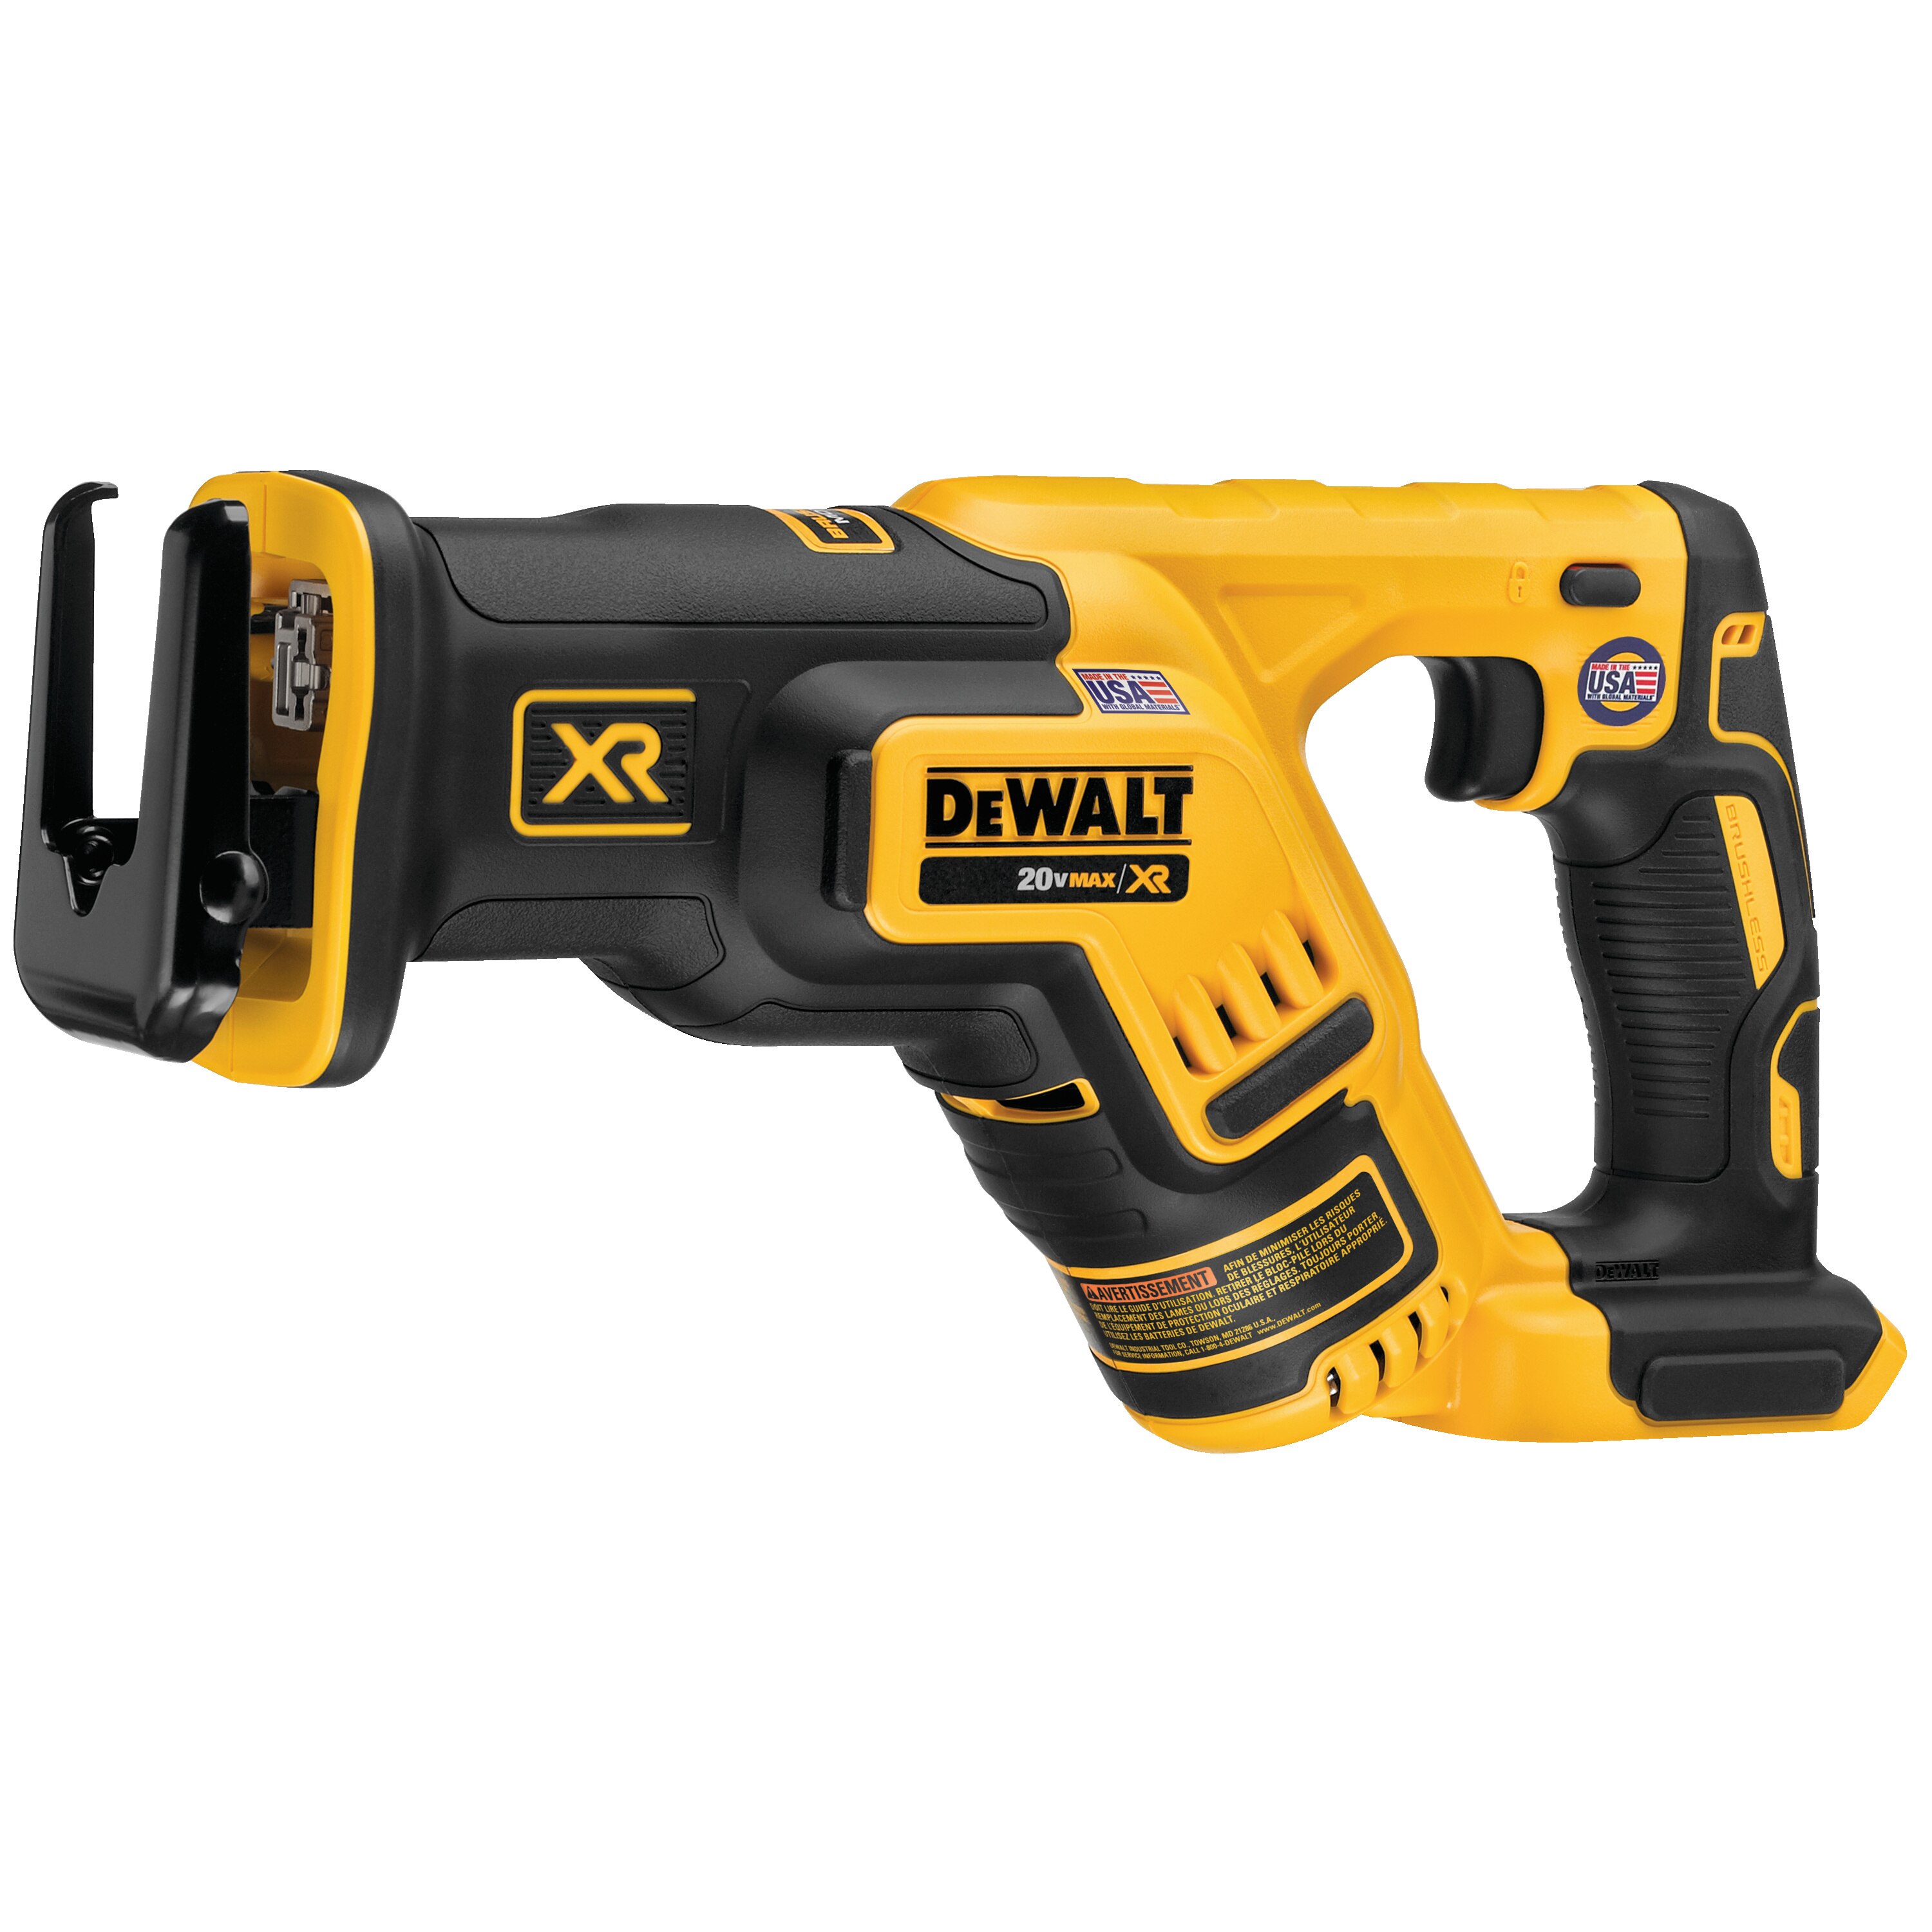 DEWALT 20V MAX* XR Brushless Compact Reciprocating Saw (Tool Only)